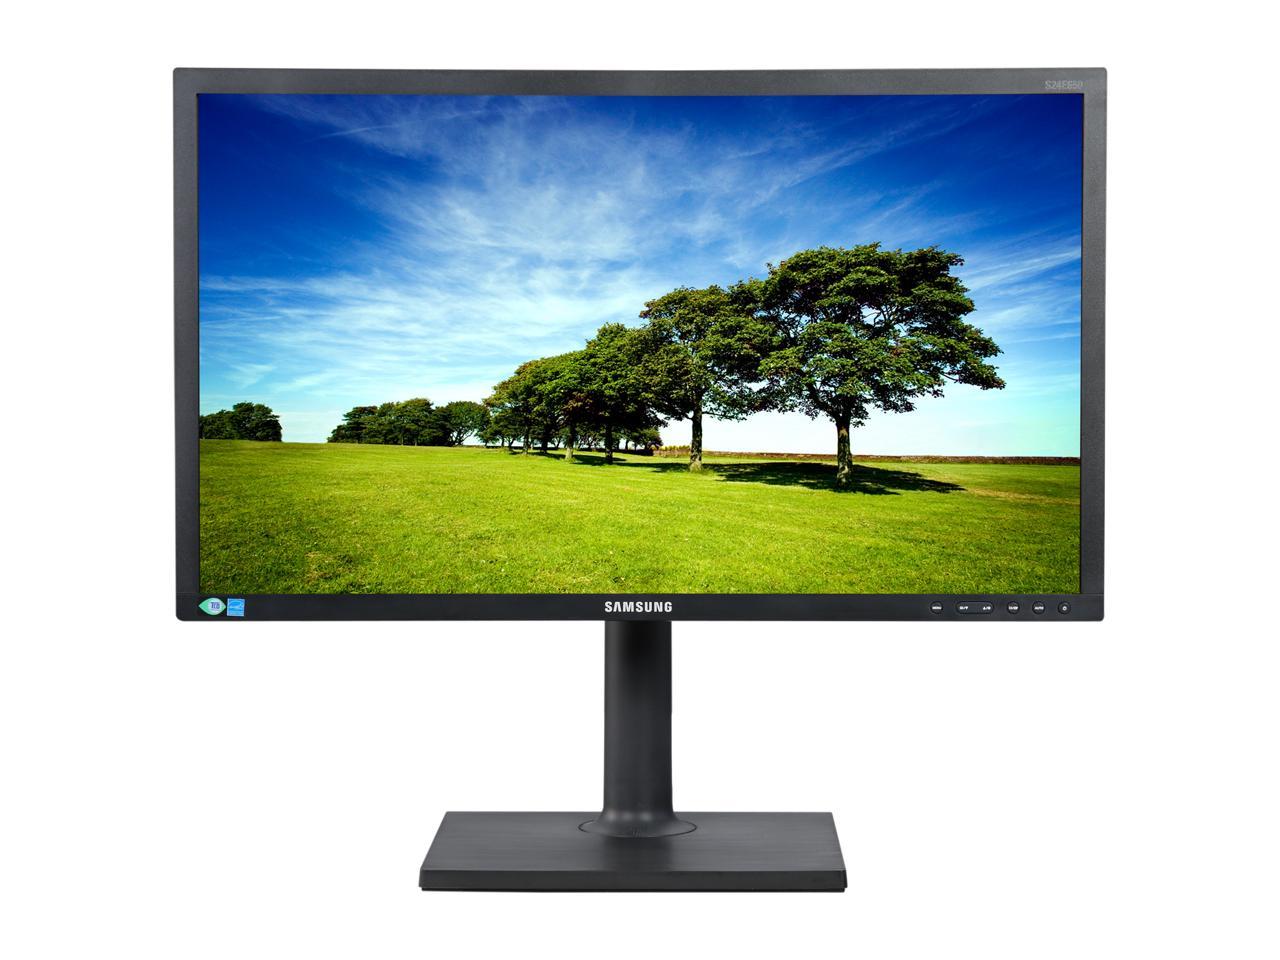 SAMSUNG S24E650PL 23.6" Full HD 1920 x 1080 4 ms 60 Hz D-Sub, HDMI Built-in Speakers LCD Monitor